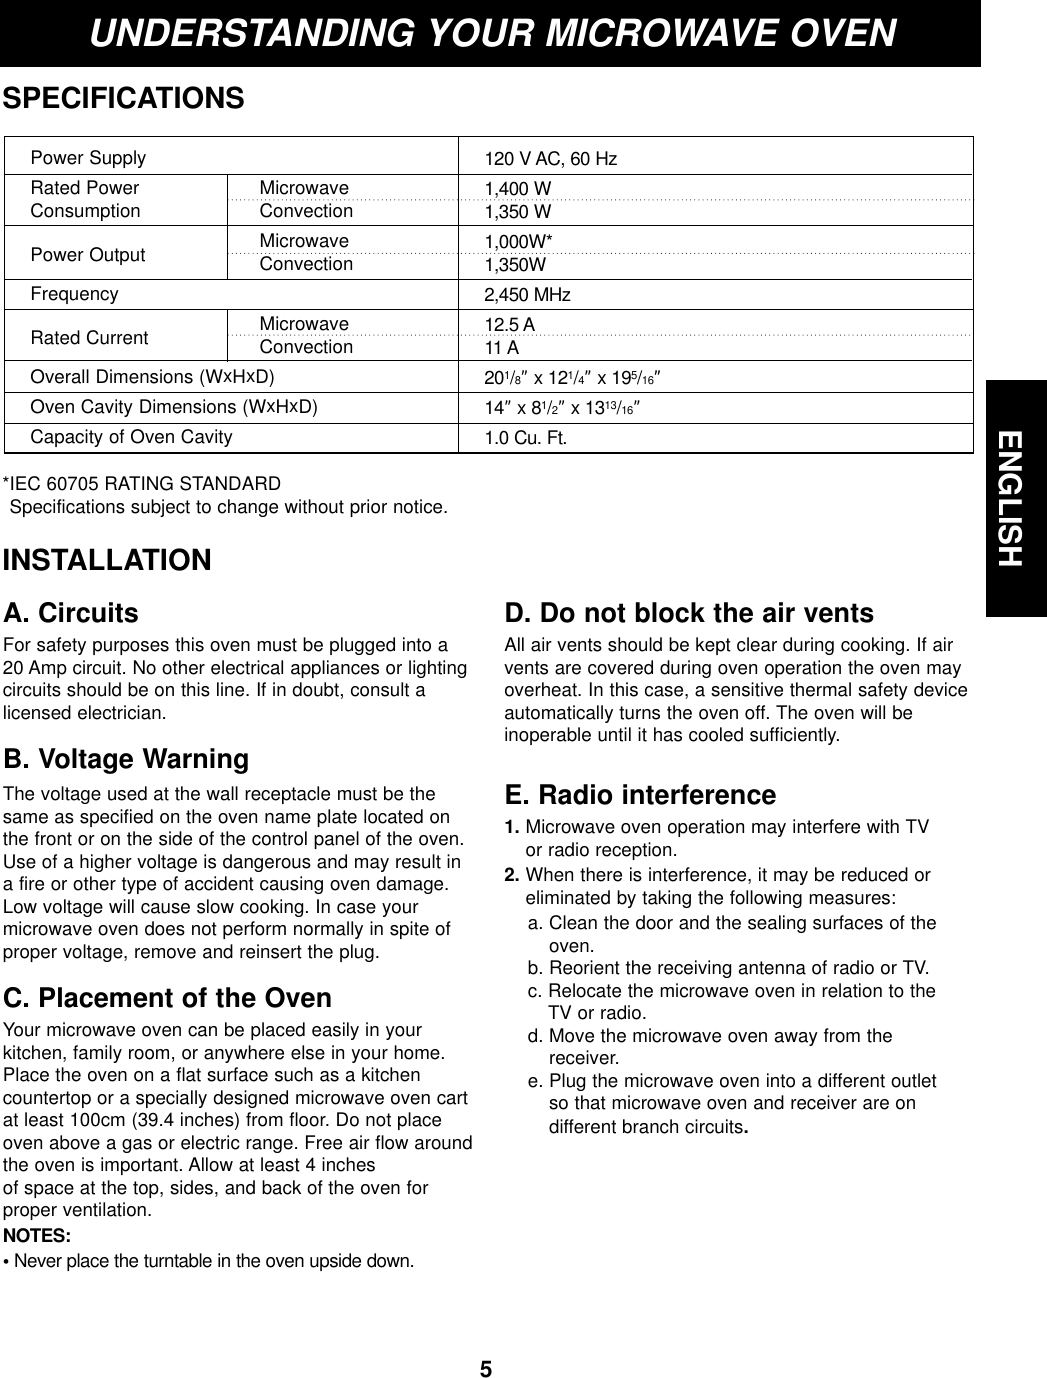 ENGLISH5UNDERSTANDING YOUR MICROWAVE OVENSPECIFICATIONS*IEC 60705 RATING STANDARD Specifications subject to change without prior notice.Power SupplyRated Power  MicrowaveConsumption ConvectionPower Output MicrowaveConvectionFrequencyRated Current MicrowaveConvectionOverall Dimensions (WxHxD)Oven Cavity Dimensions (WxHxD)Capacity of Oven Cavity120 V AC, 60 Hz1,400 W1,350 W1,000W*1,350W2,450 MHz12.5 A11 A201/8” x 121/4” x 195/16” 14” x 81/2” x 1313/16” 1.0 Cu. Ft.INSTALLATIONA. CircuitsFor safety purposes this oven must be plugged into a20 Amp circuit. No other electrical appliances or lightingcircuits should be on this line. If in doubt, consult alicensed electrician.B. Voltage Warning The voltage used at the wall receptacle must be thesame as specified on the oven name plate located onthe front or on the side of the control panel of the oven.Use of a higher voltage is dangerous and may result ina fire or other type of accident causing oven damage.Low voltage will cause slow cooking. In case yourmicrowave oven does not perform normally in spite ofproper voltage, remove and reinsert the plug.C. Placement of the OvenYour microwave oven can be placed easily in yourkitchen, family room, or anywhere else in your home.Place the oven on a flat surface such as a kitchencountertop or a specially designed microwave oven cartat least 100cm (39.4 inches) from floor. Do not placeoven above a gas or electric range. Free air flow aroundthe oven is important. Allow at least 4 inches of space at the top, sides, and back of the oven forproper ventilation. NOTES:•Never place the turntable in the oven upside down.D. Do not block the air ventsAll air vents should be kept clear during cooking. If airvents are covered during oven operation the oven mayoverheat. In this case, a sensitive thermal safety deviceautomatically turns the oven off. The oven will be inoperable until it has cooled sufficiently.E. Radio interference1. Microwave oven operation may interfere with TV or radio reception.2. When there is interference, it may be reduced oreliminated by taking the following measures:a. Clean the door and the sealing surfaces of theoven.b. Reorient the receiving antenna of radio or TV.c. Relocate the microwave oven in relation to the TV or radio.d. Move the microwave oven away from the receiver.e. Plug the microwave oven into a different outlet so that microwave oven and receiver are on different branch circuits.